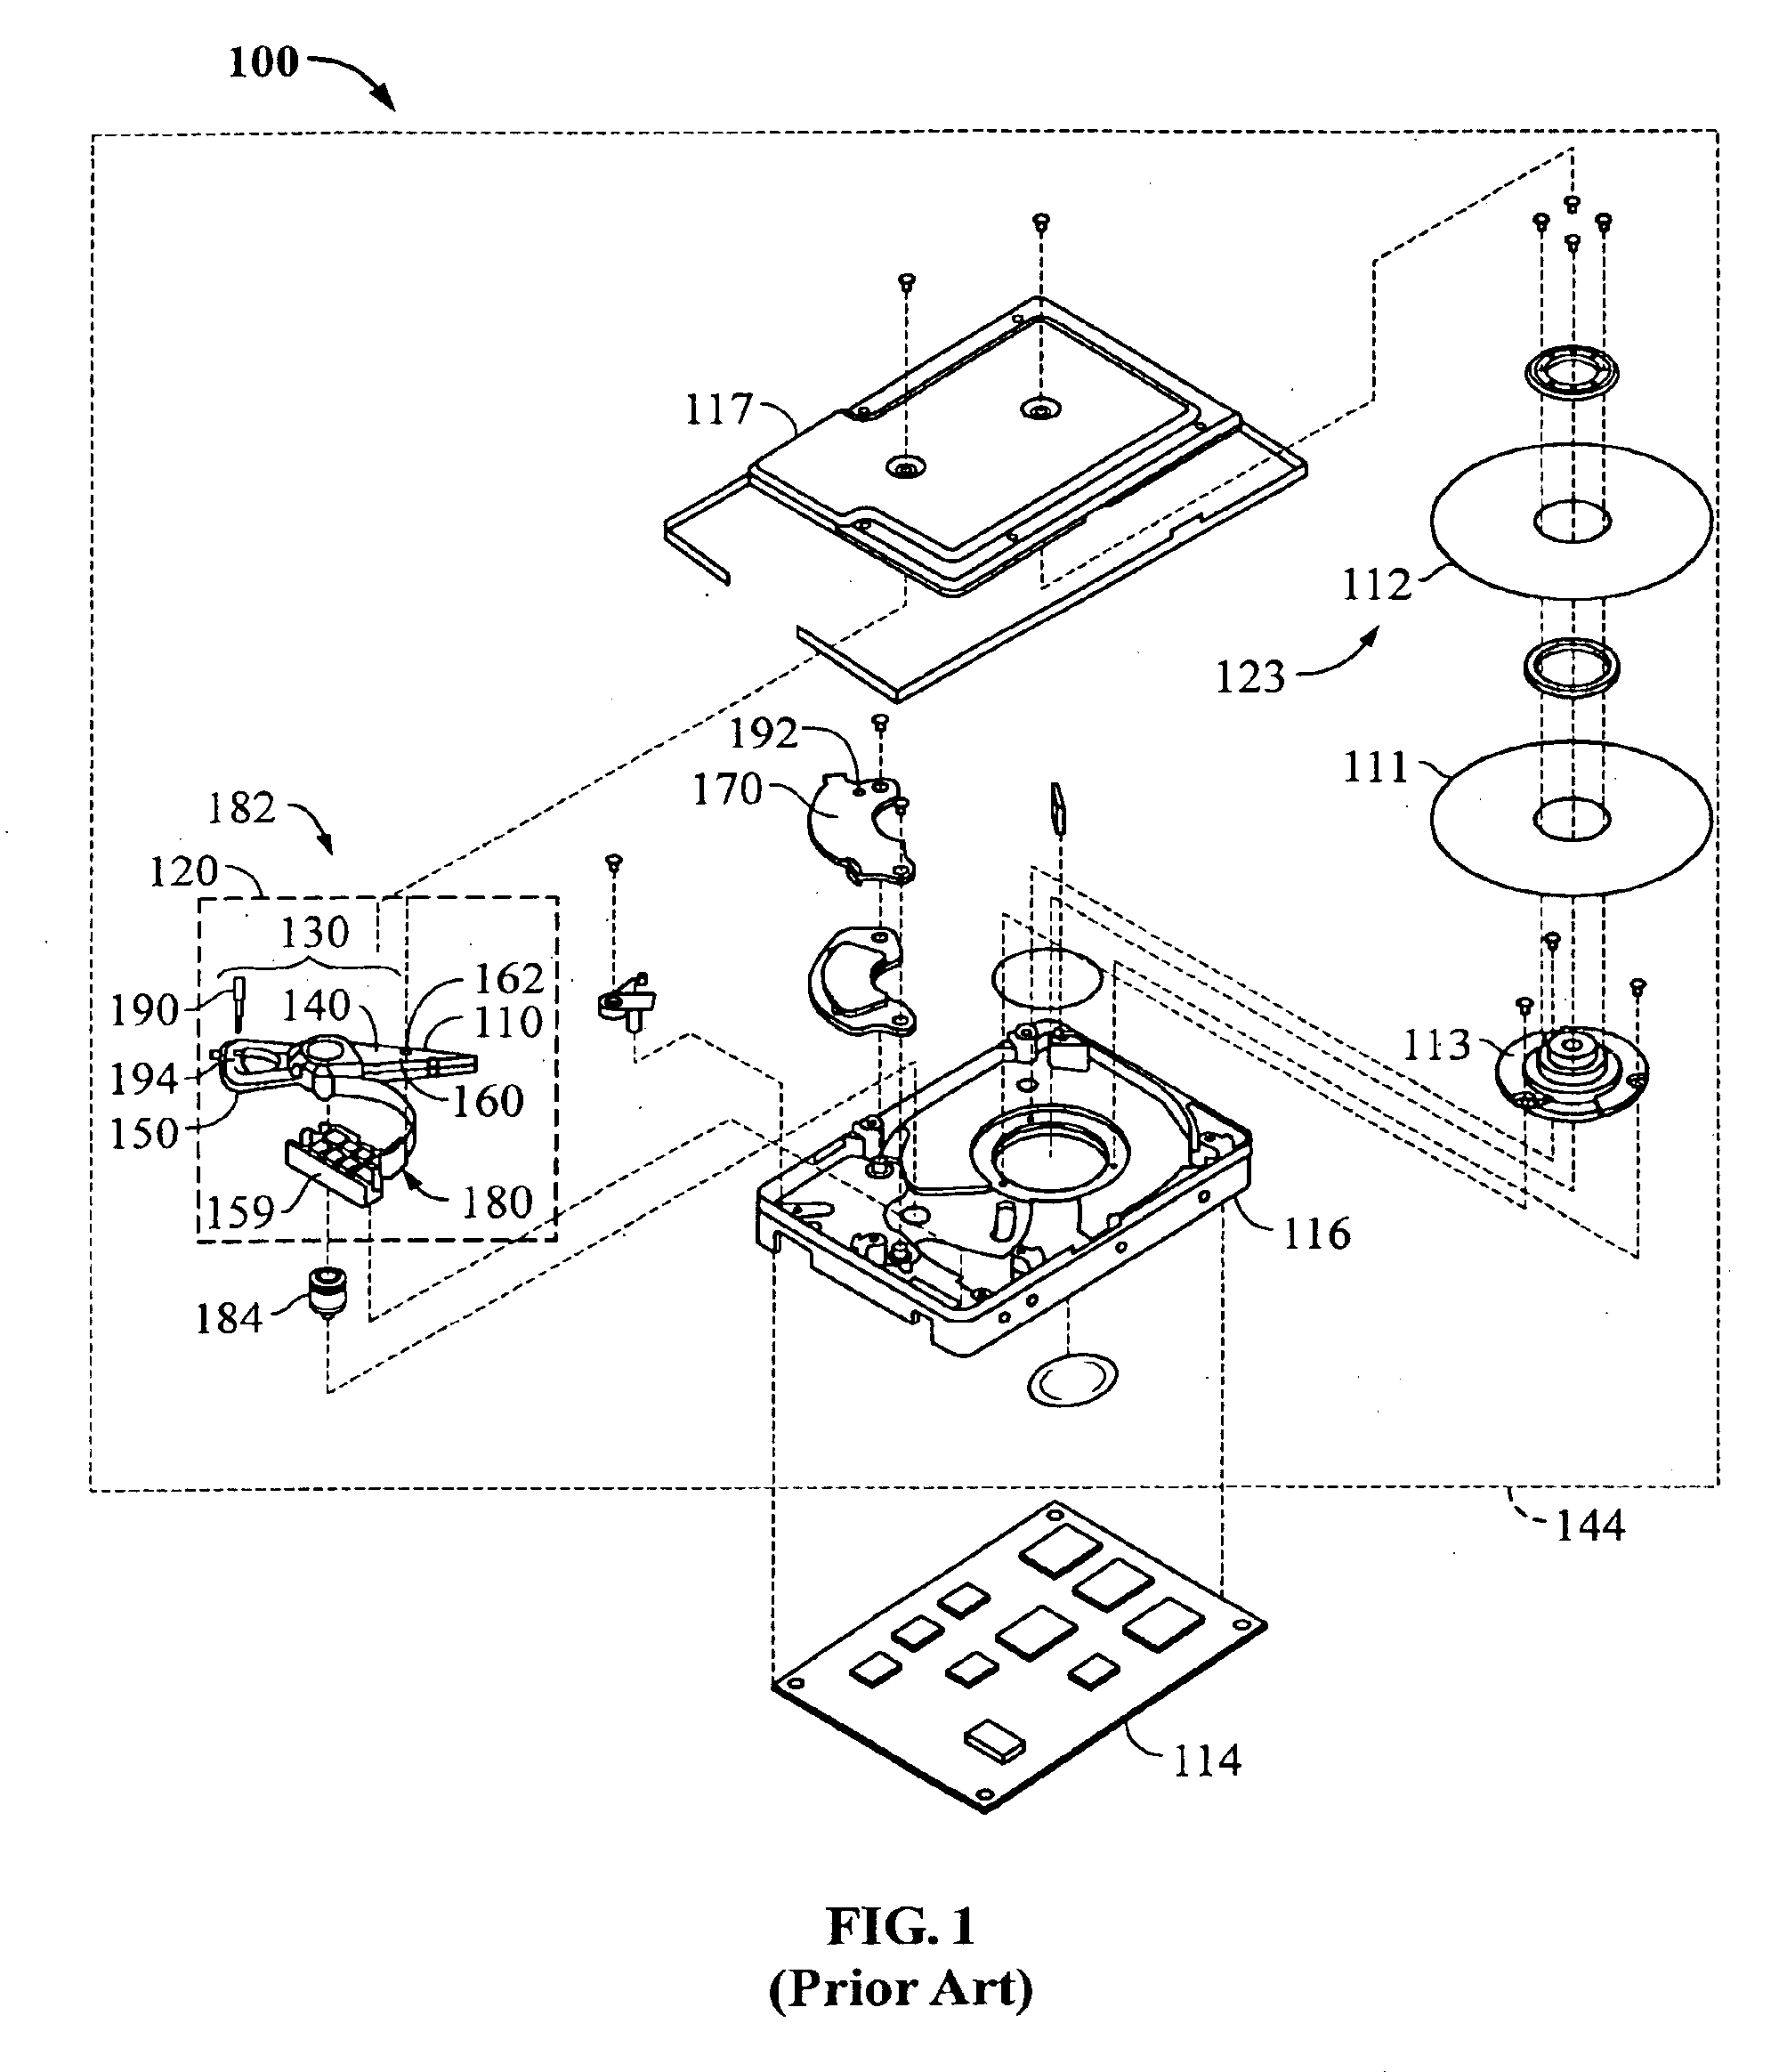 Disk drive having a head disk assembly enclosure including insert molded components